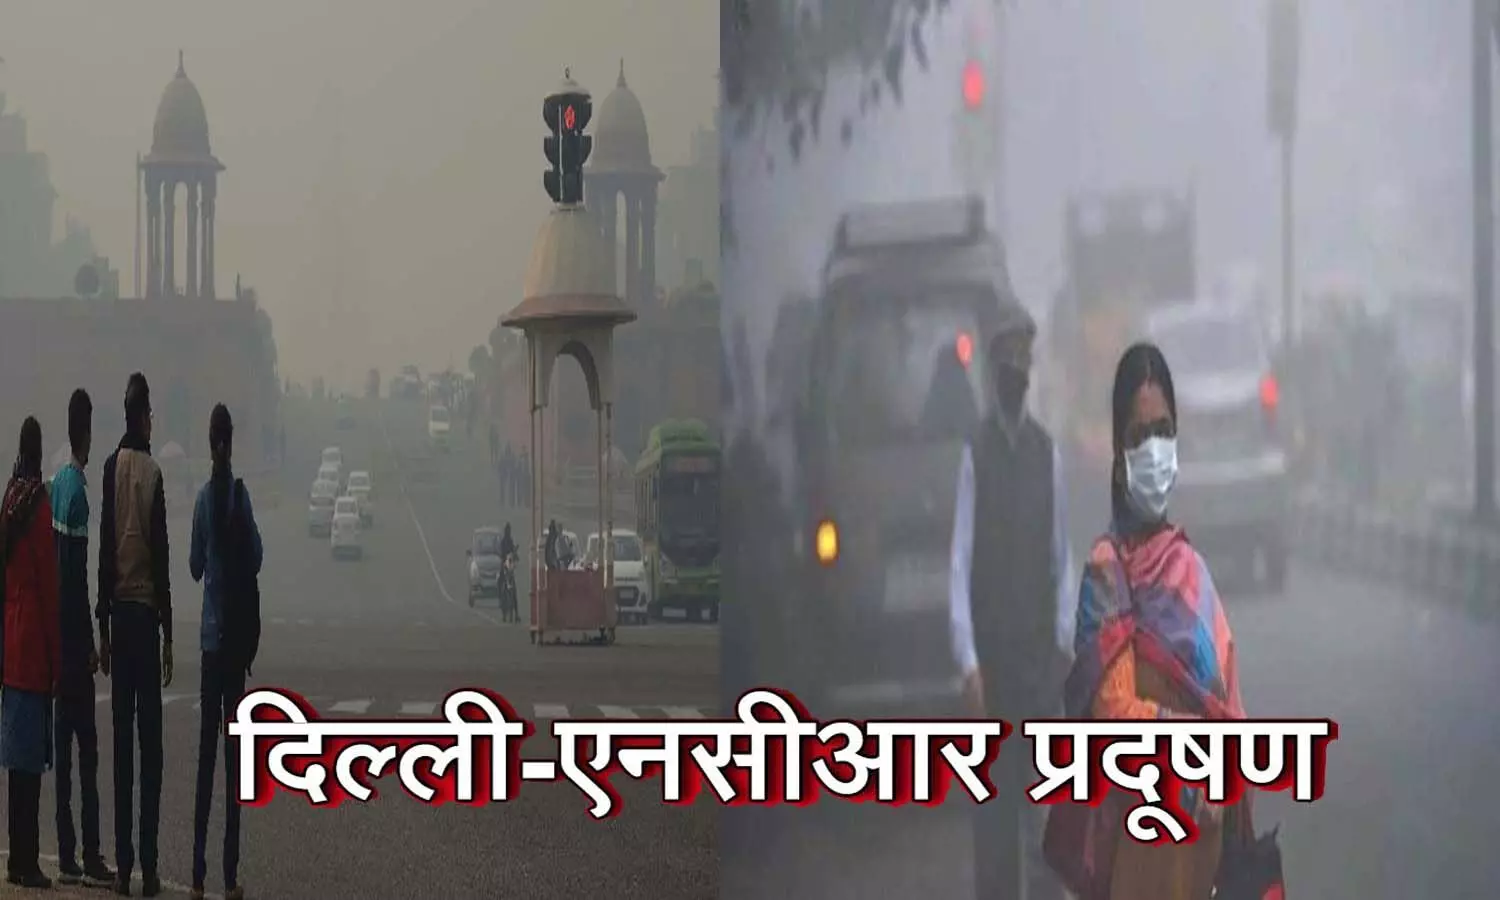 Air pollution level increased due to smog in Delhi-NCR, condition critical